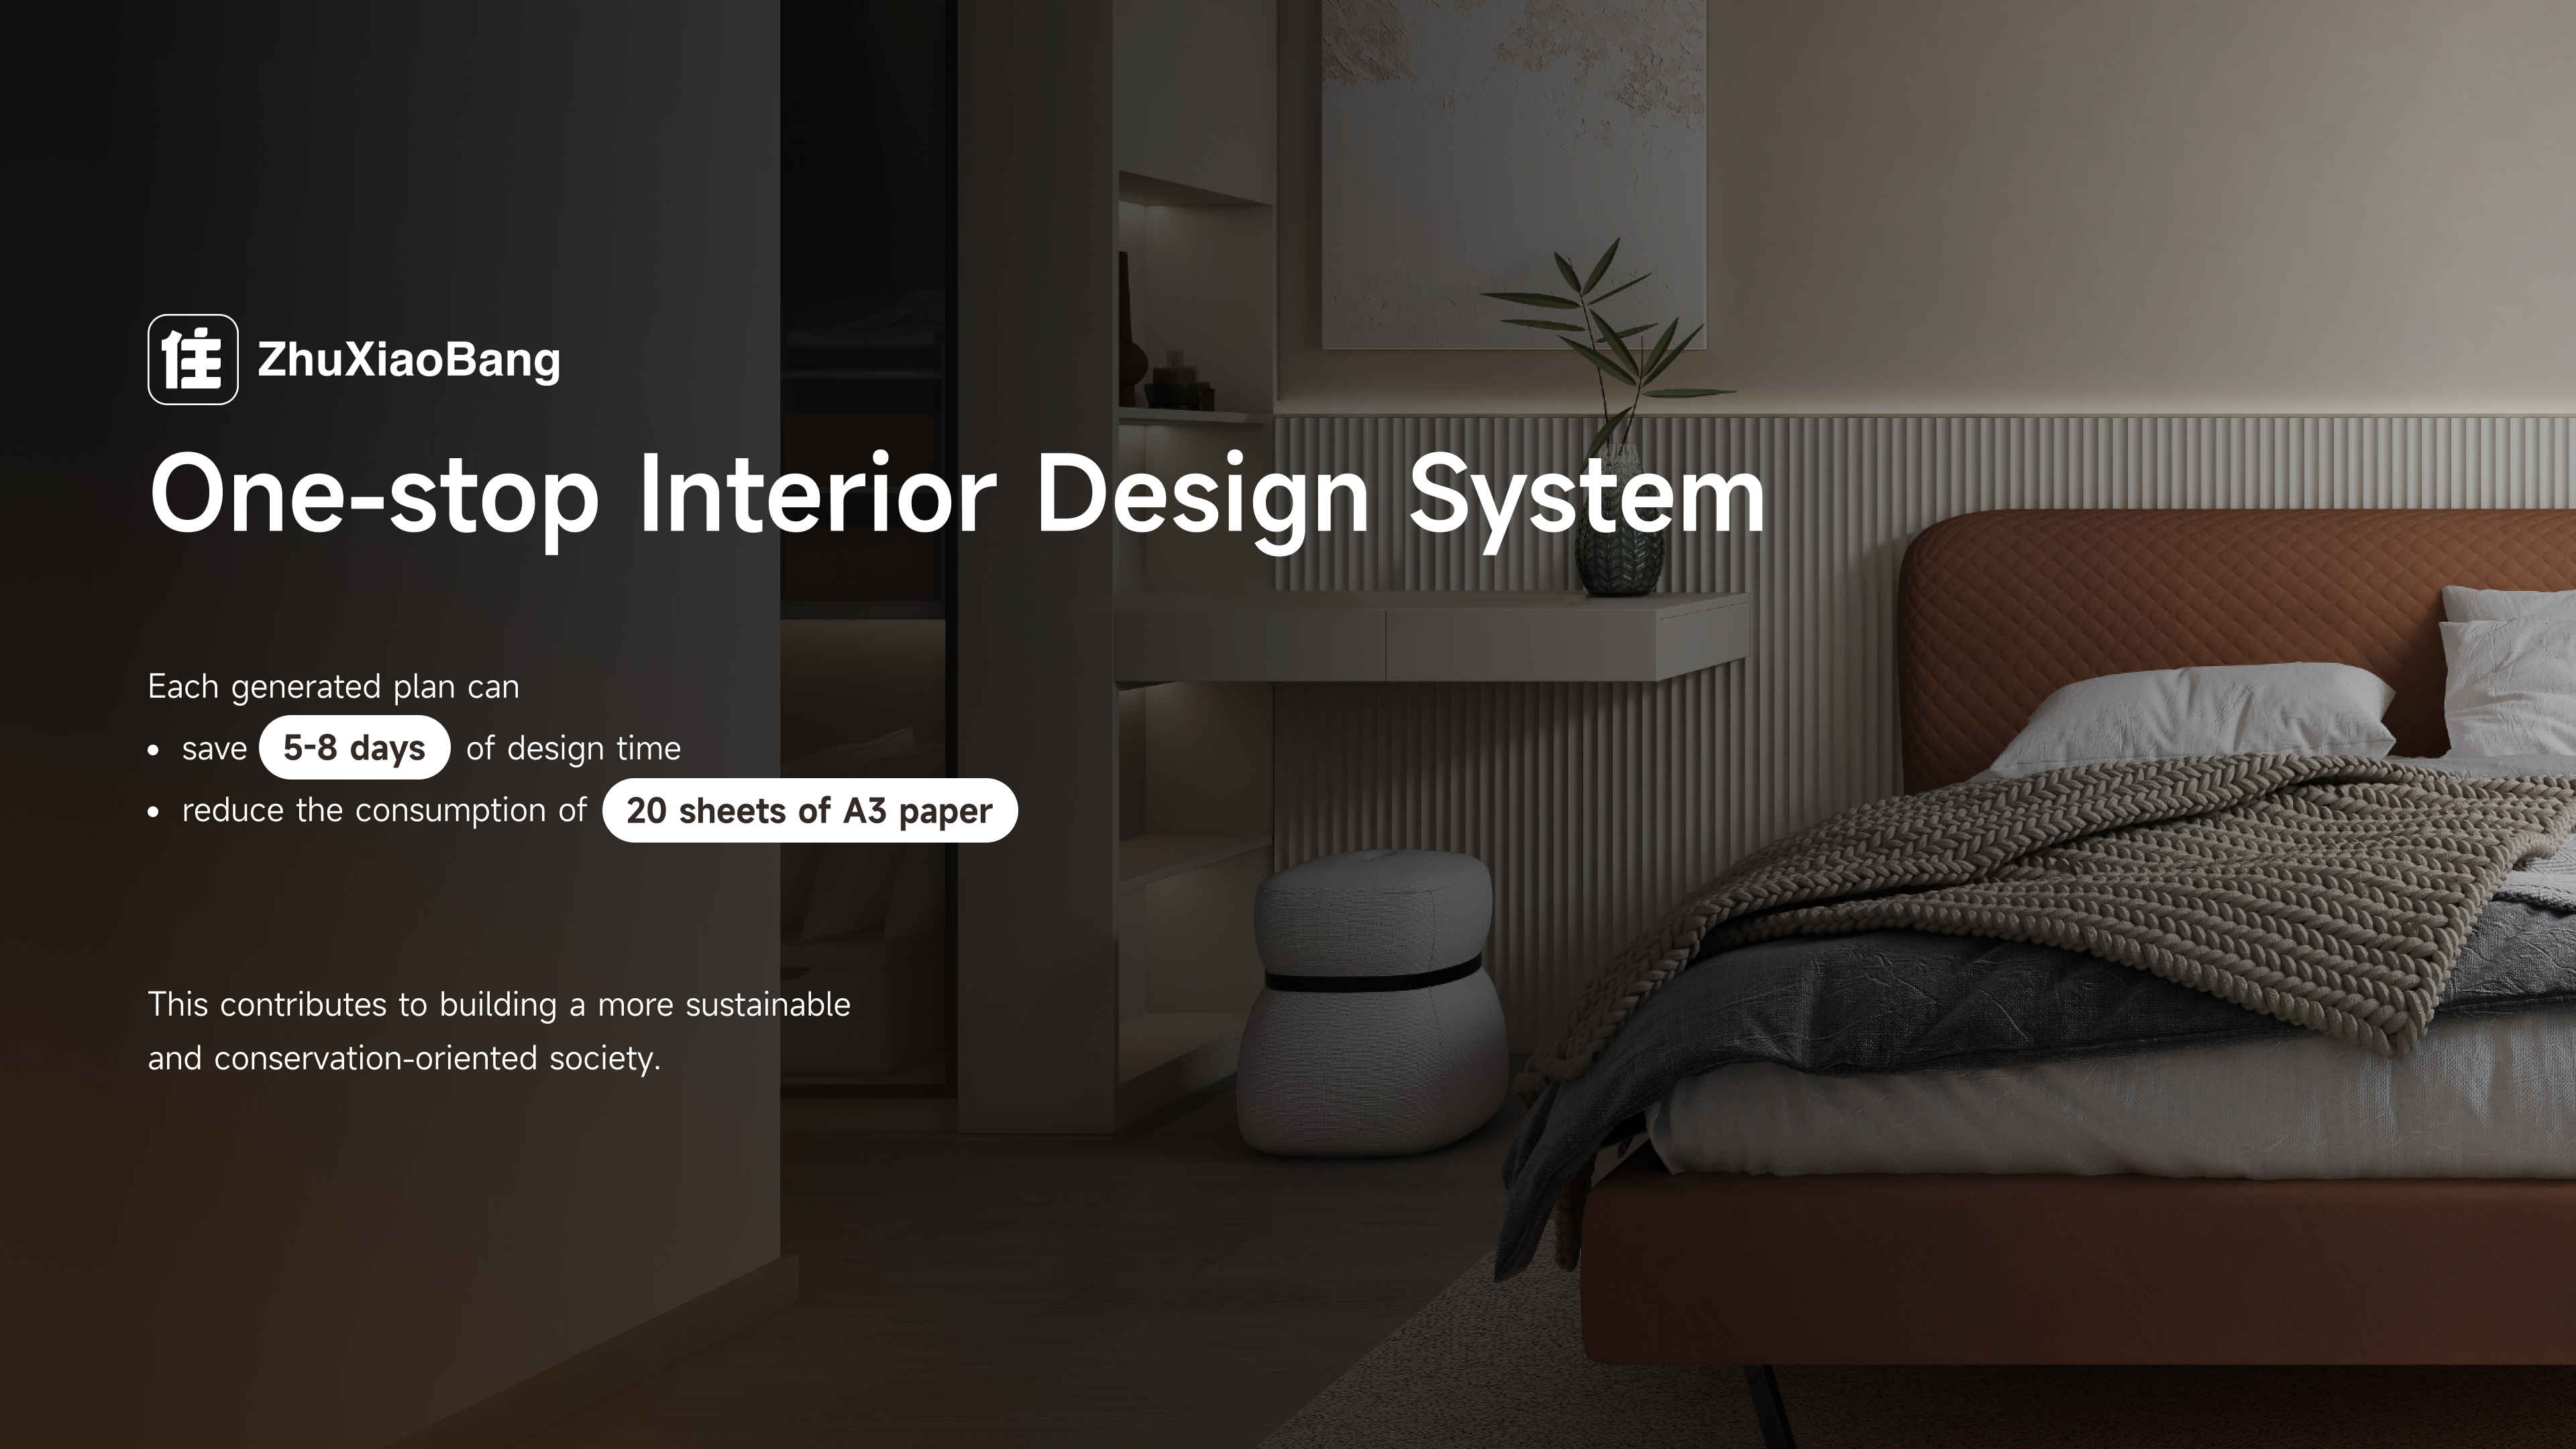 ZhuXiaoBang One-stop Interior Design System